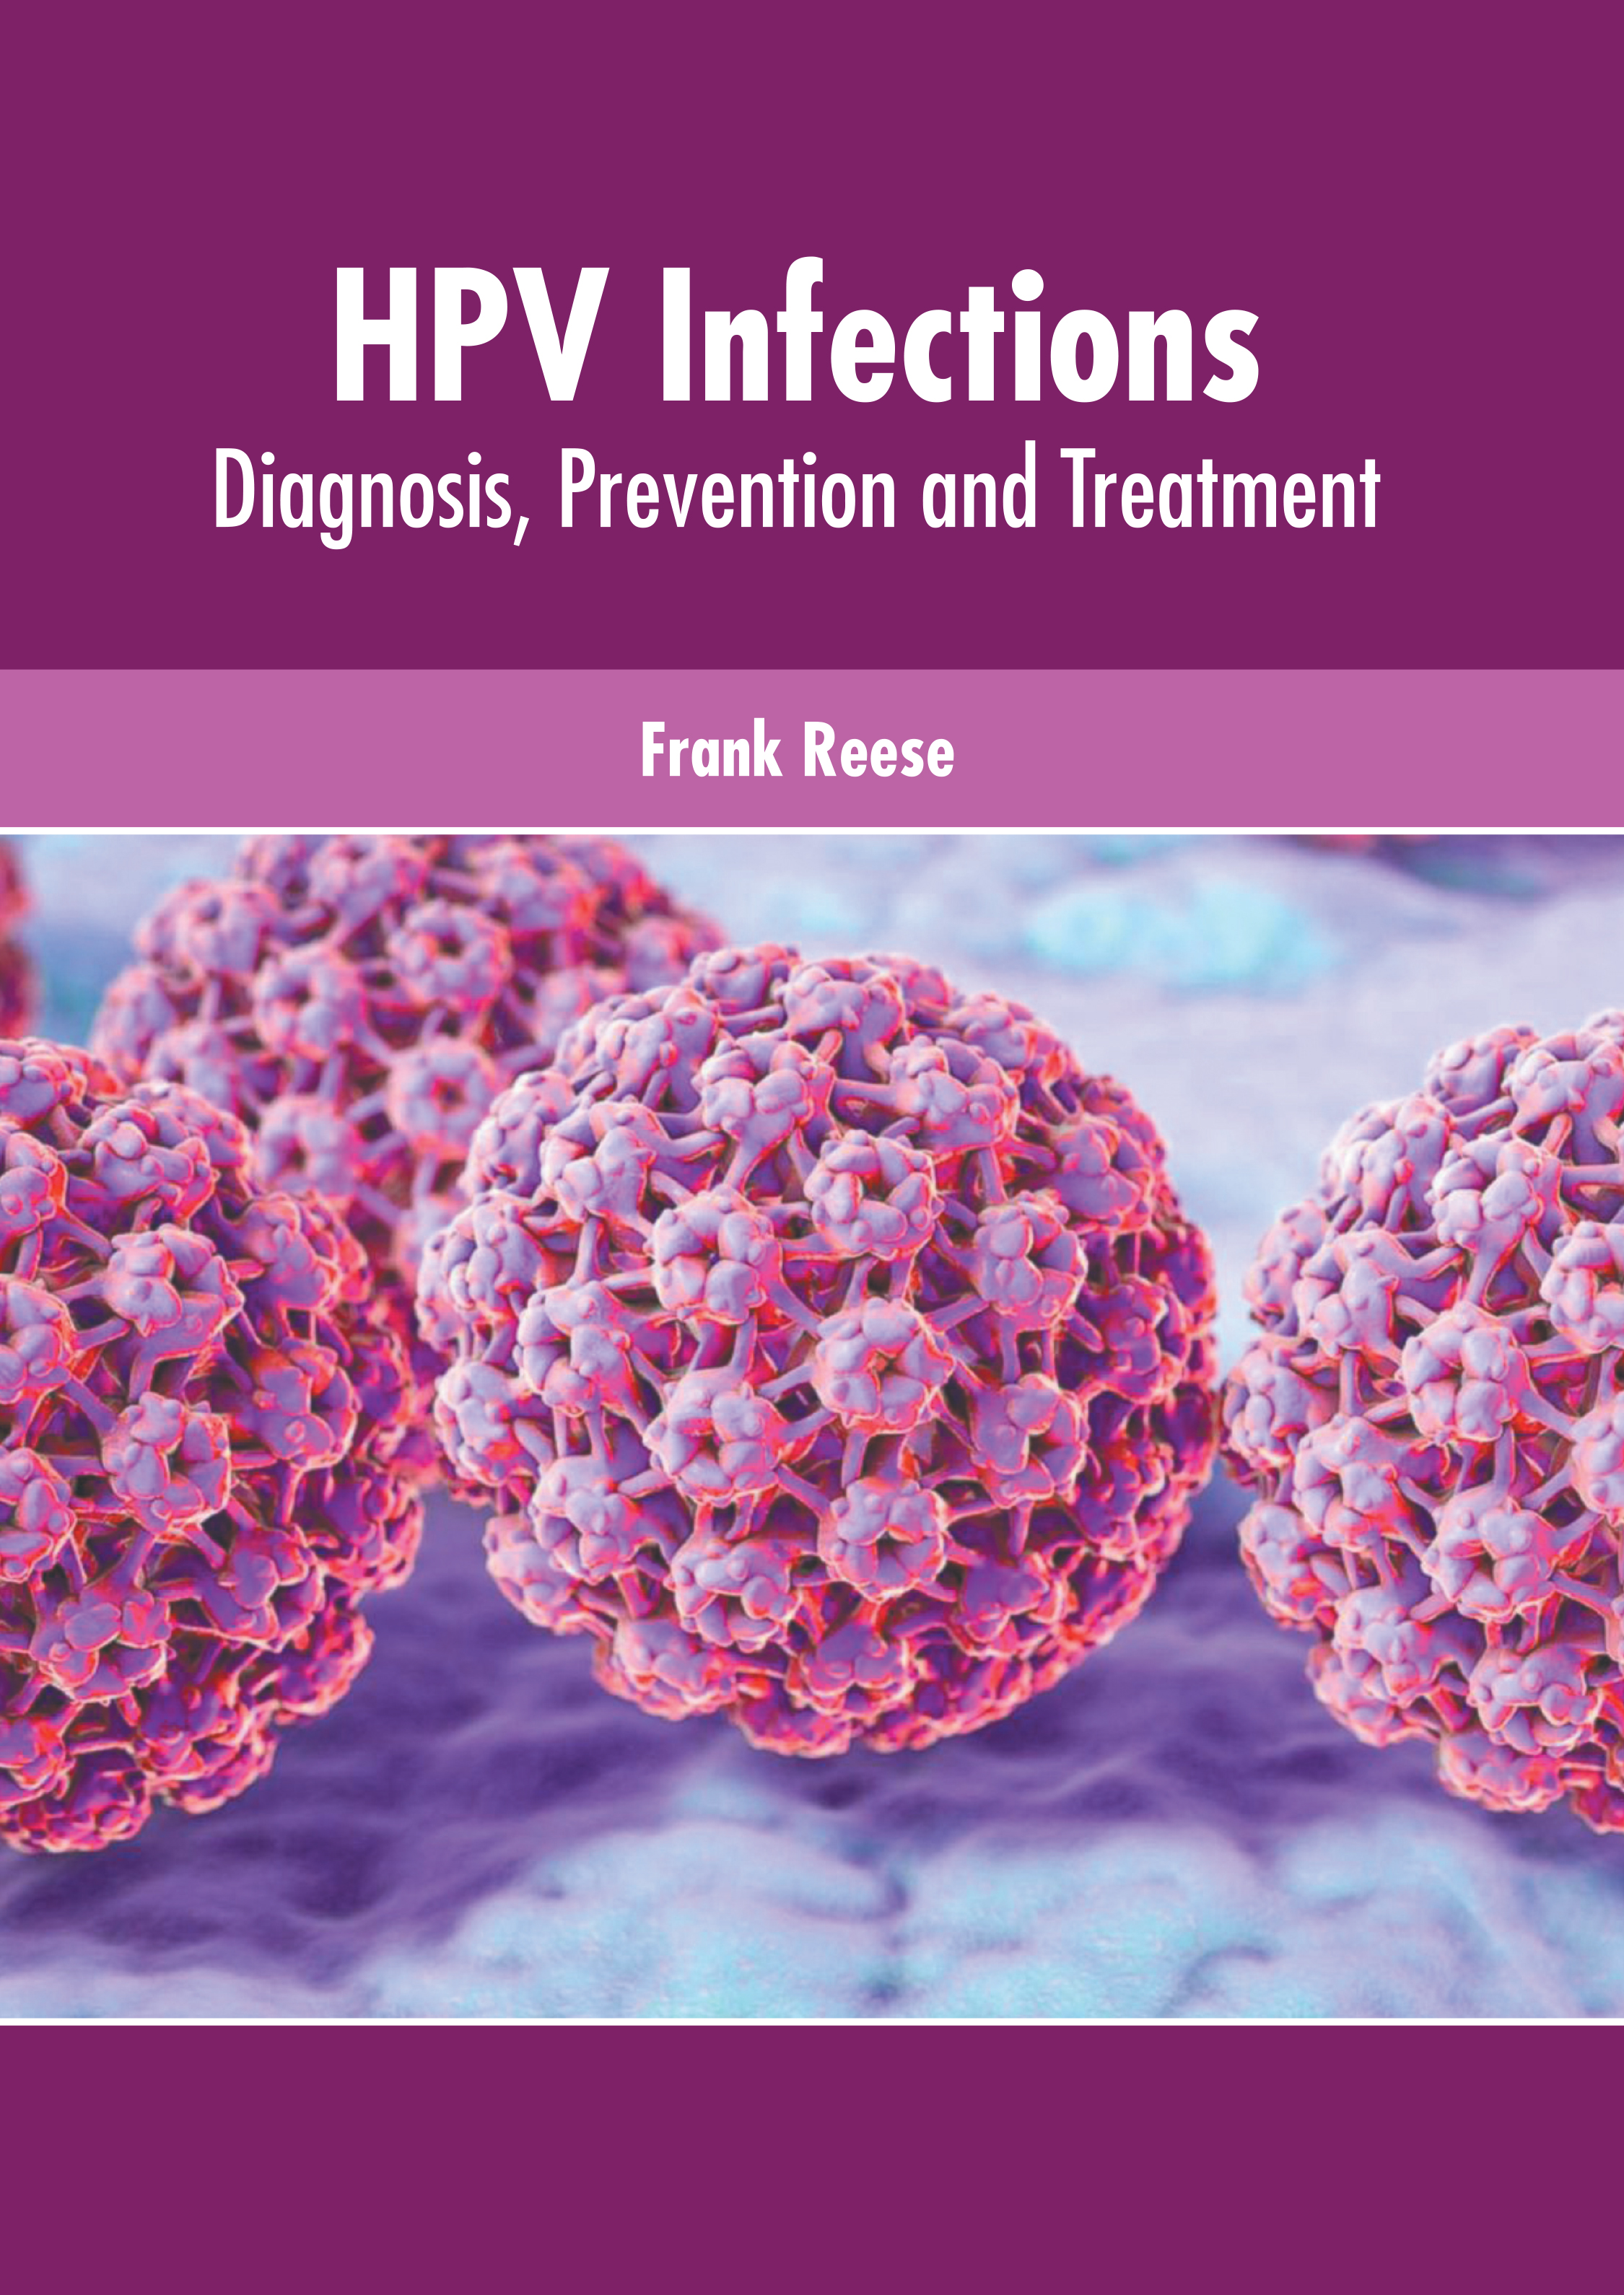 
medical-reference-books/microbiology/hpv-infections-diagnosis-prevention-and-treatment-9781639272228